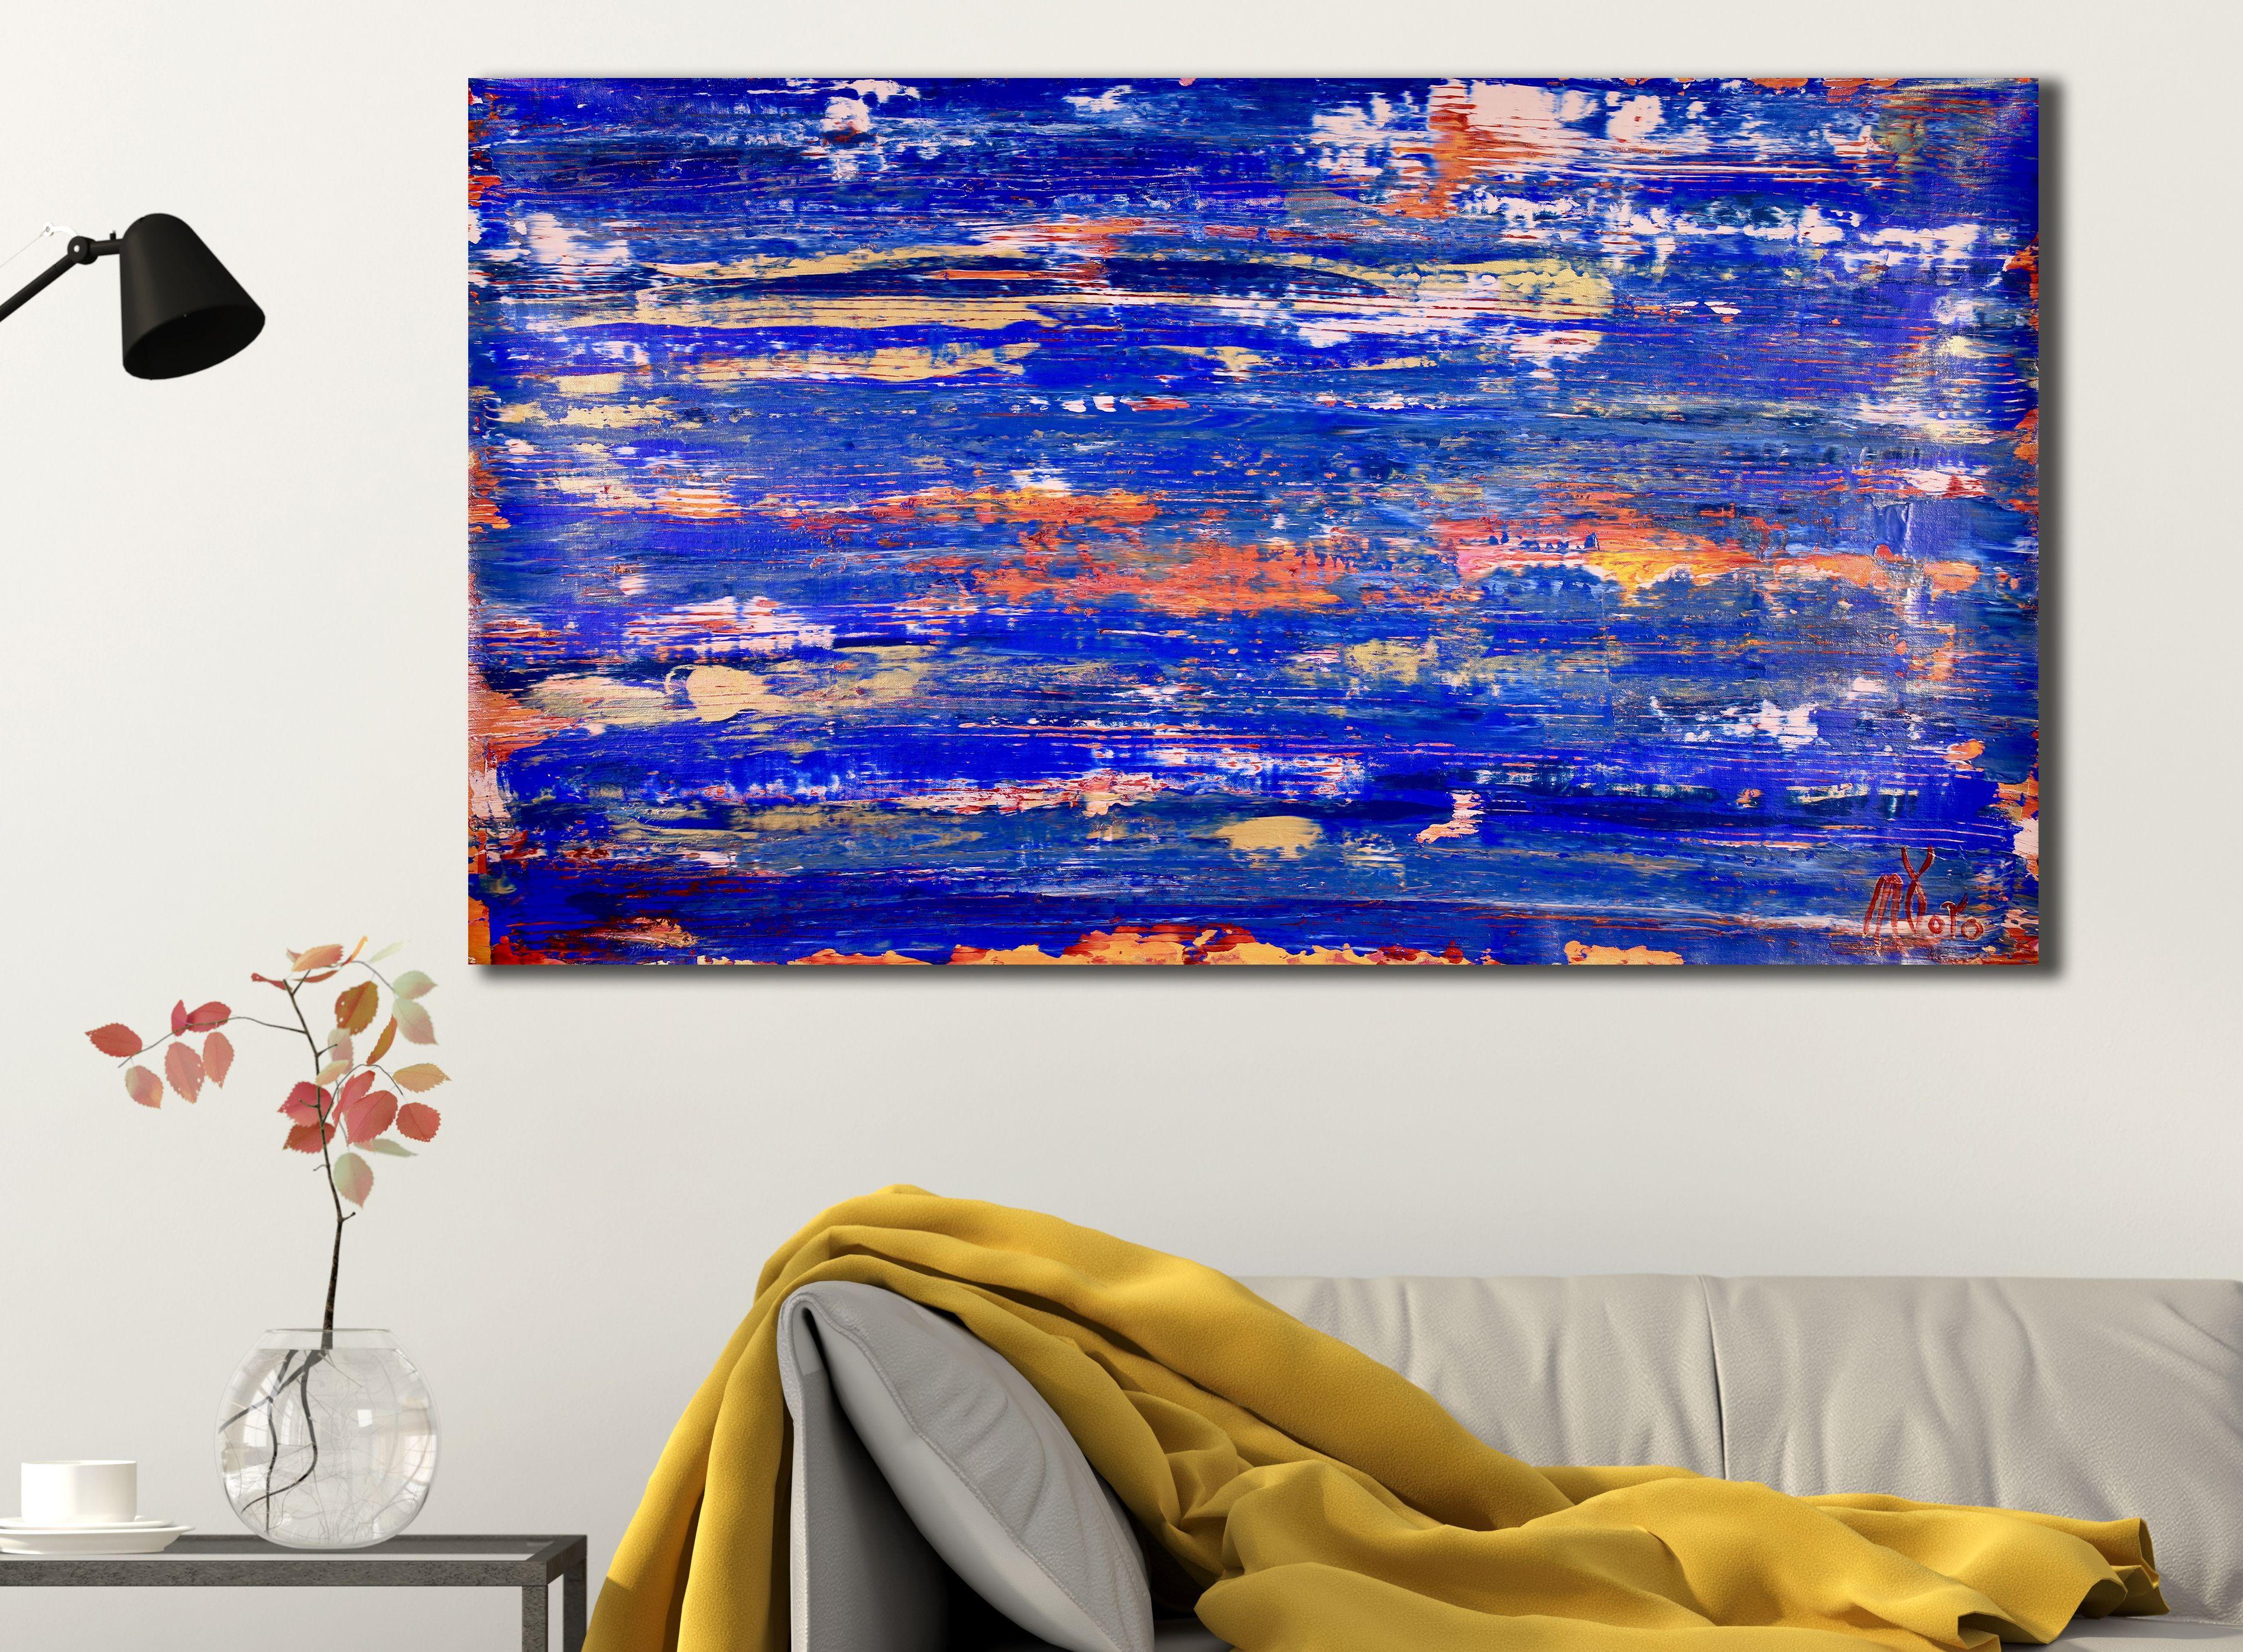 Nature inspired abstract orange shades, blues, earthy tones and gold. Signed in red!     ORIGINAL FINE ABSTRACTS - ONE OF A KIND!  I only make original works. Each is a one of a kind so you will have the only one! My artwork is my passion and you